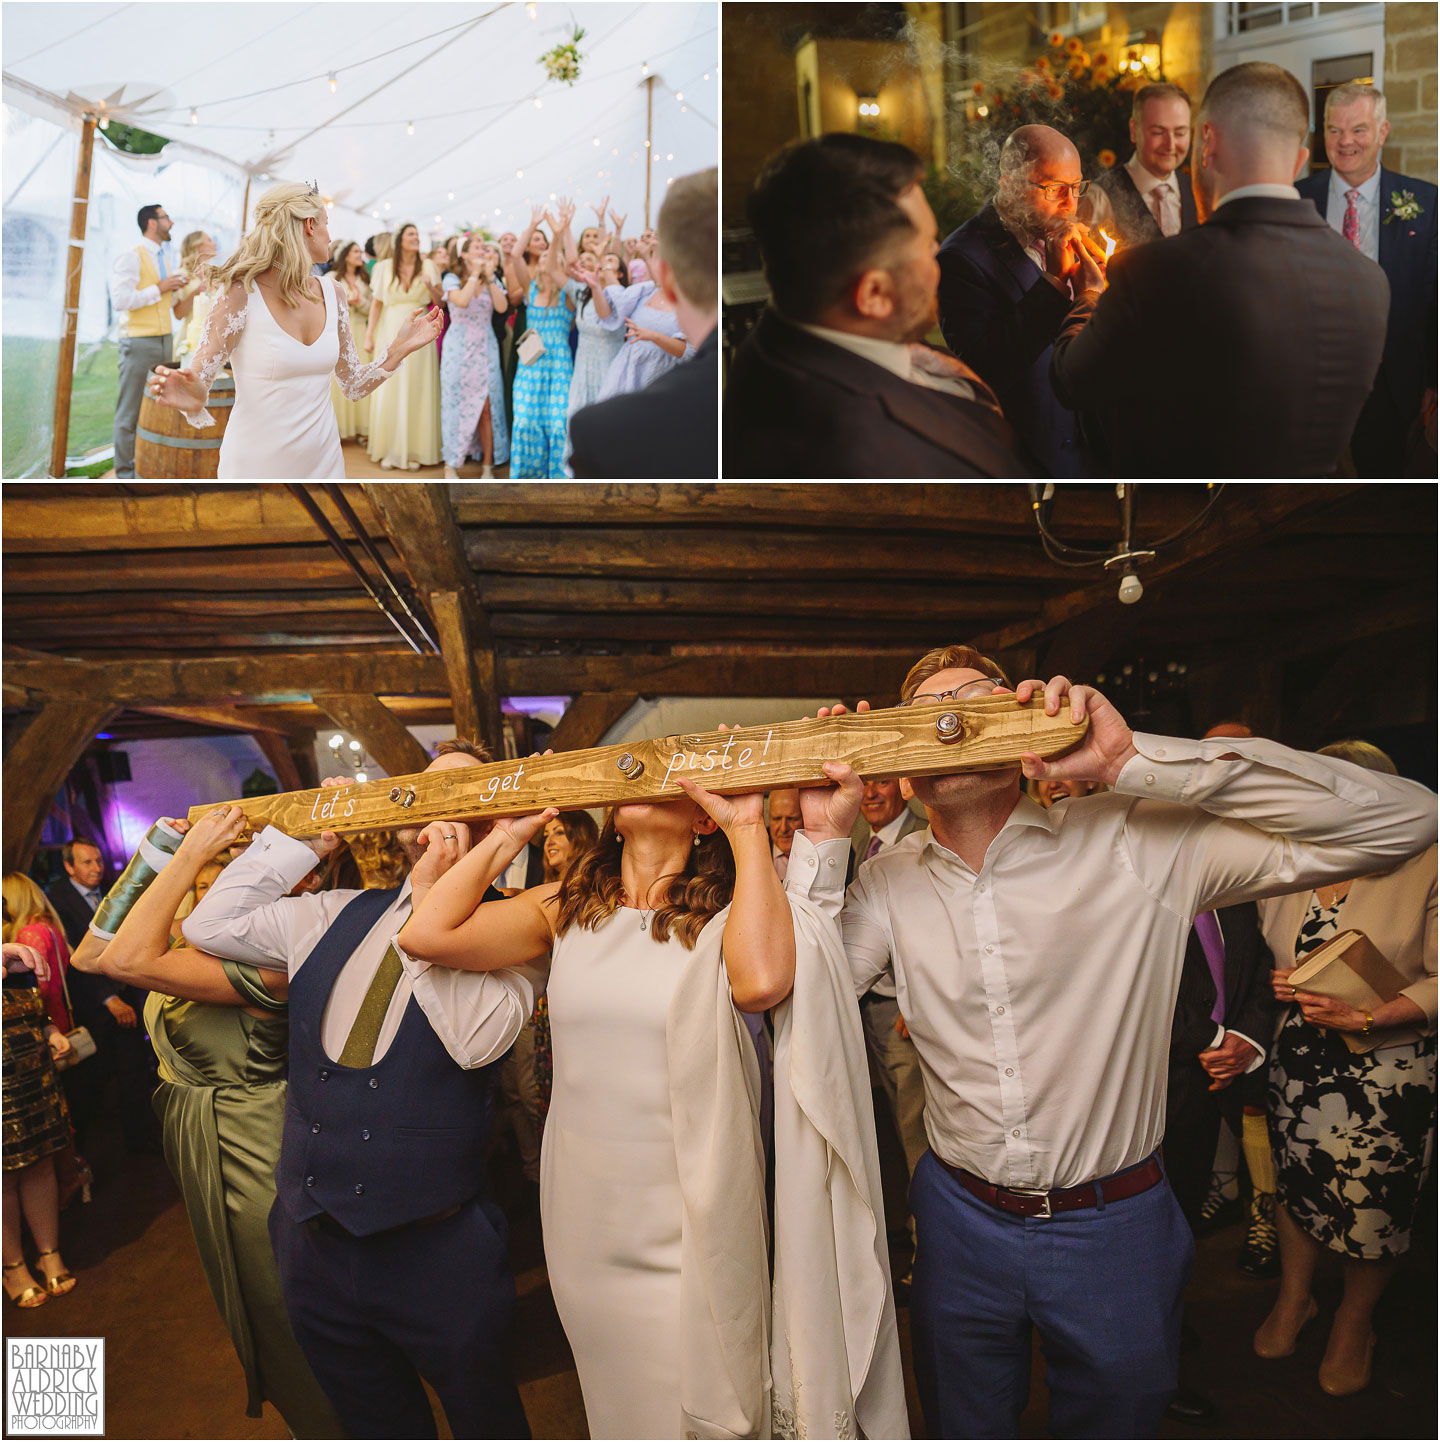 Candid evening wedding photography moments at The Merchant Adventurers Hall in Yorkshire